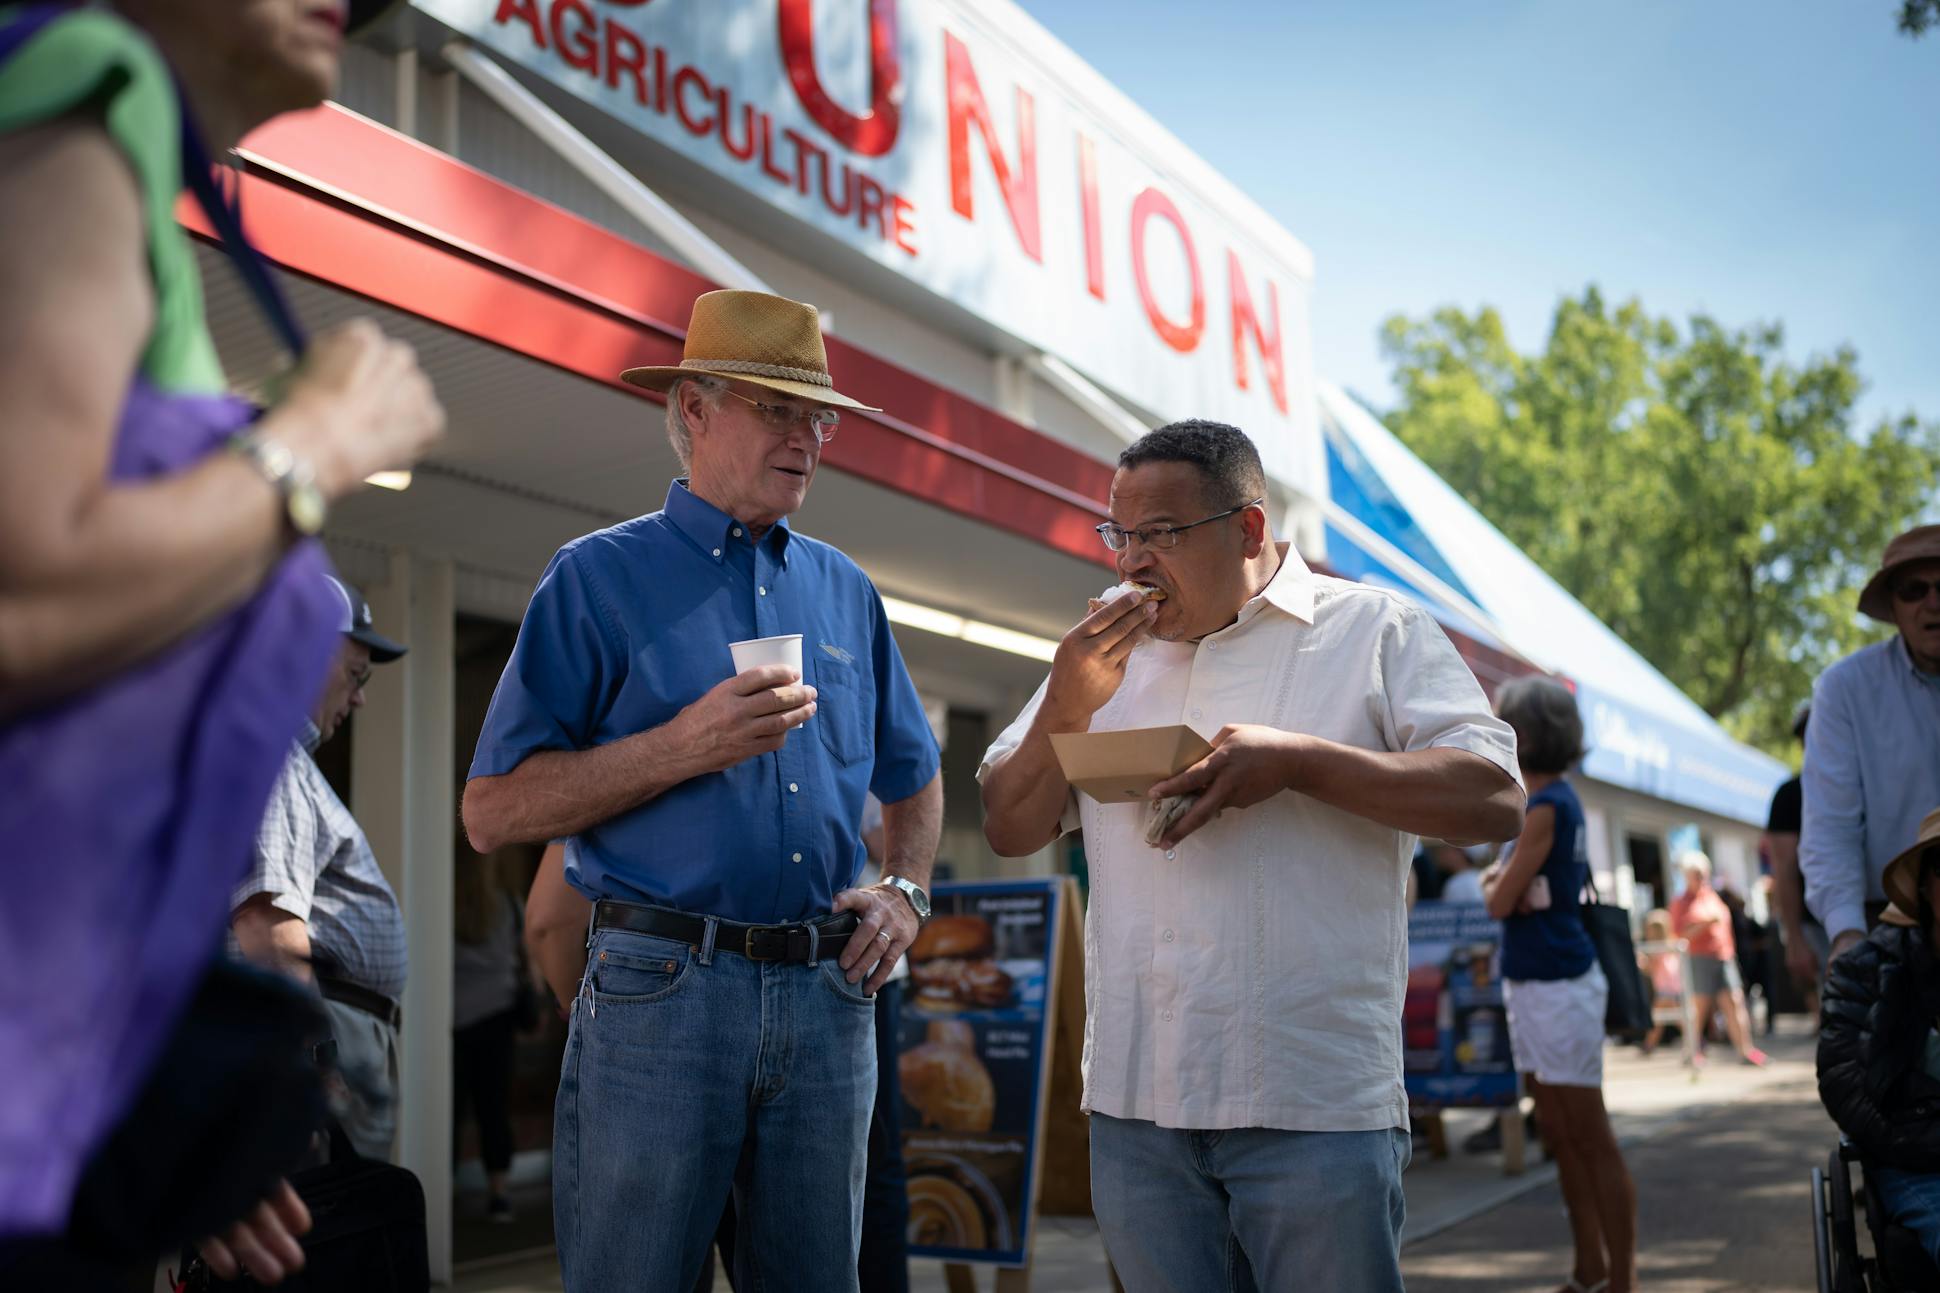 Minnesota Farmers Union President Gary Wertish, left, talked with Minnesota Attorney General Keith Ellison on Aug. 26, while Ellison ate one of the Farmers Union specialties, aronia berry meringue pie.